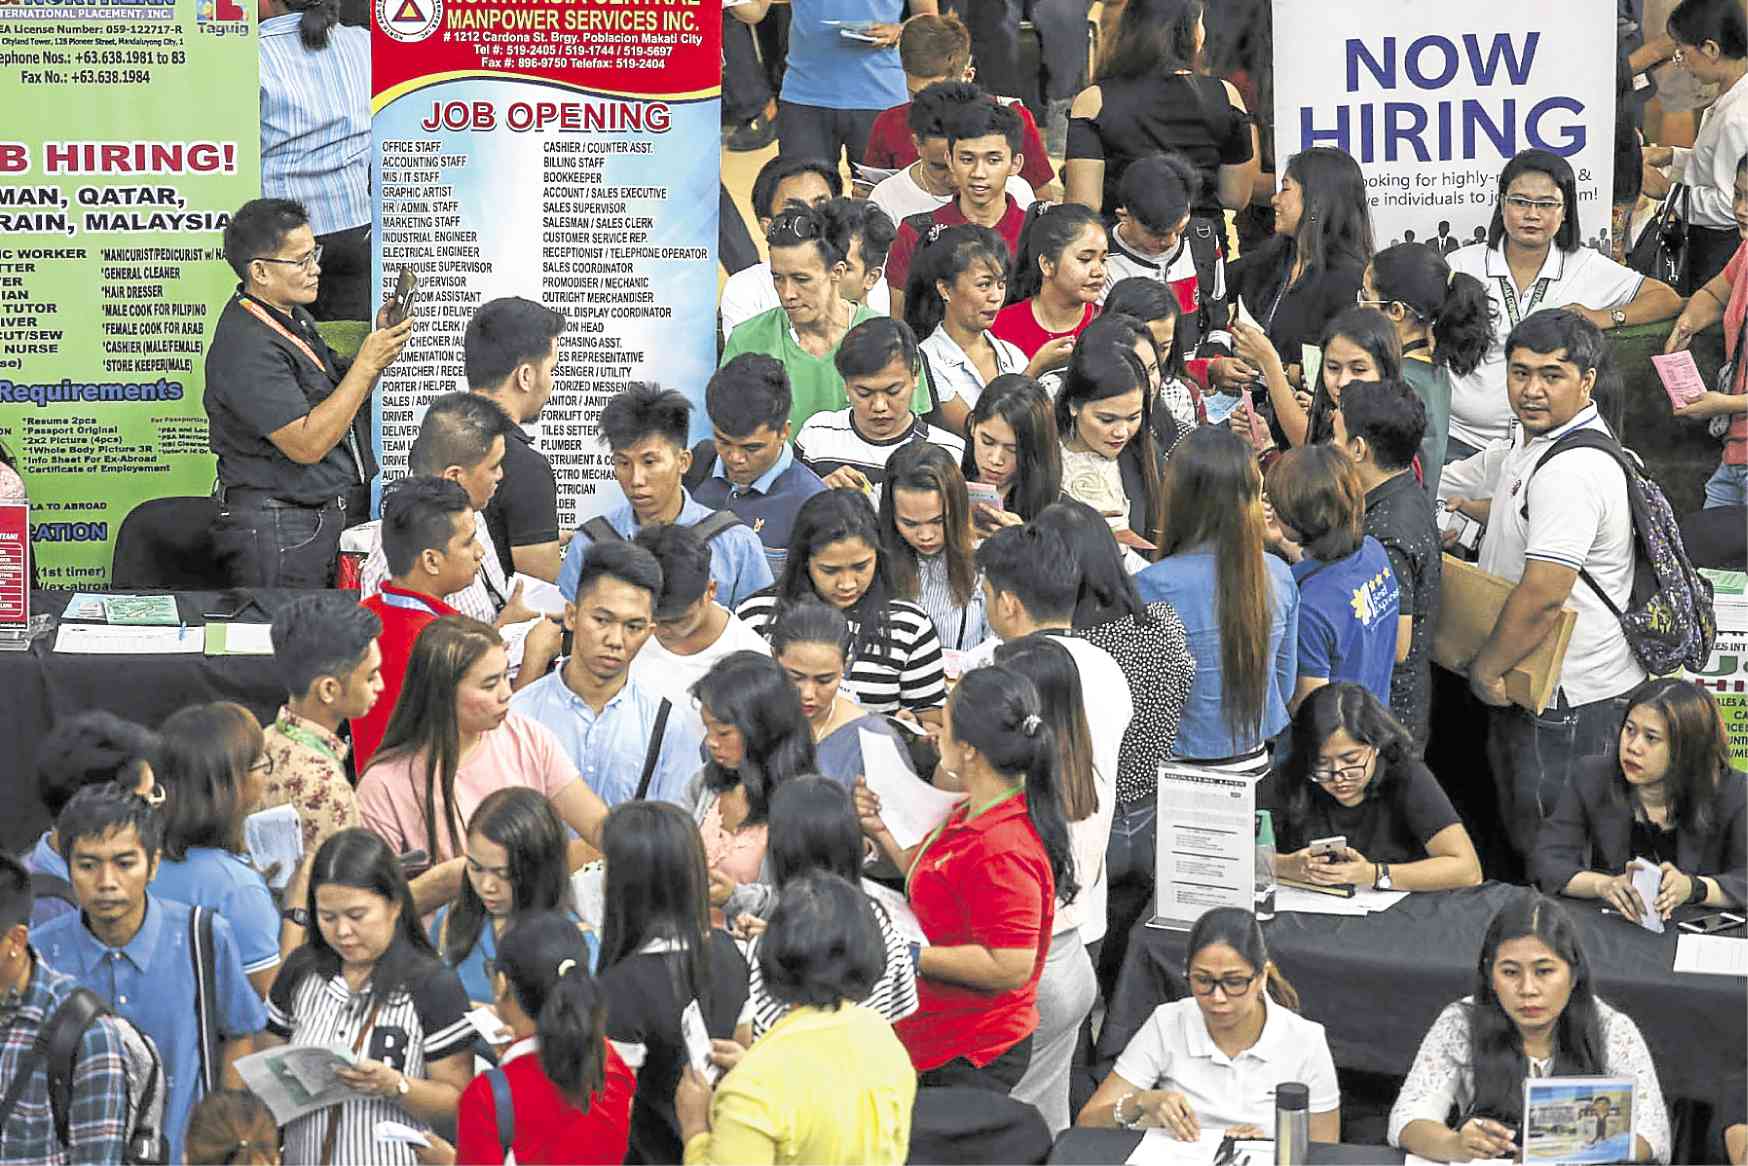 Law waives gov’t fees for first-time jobseekers